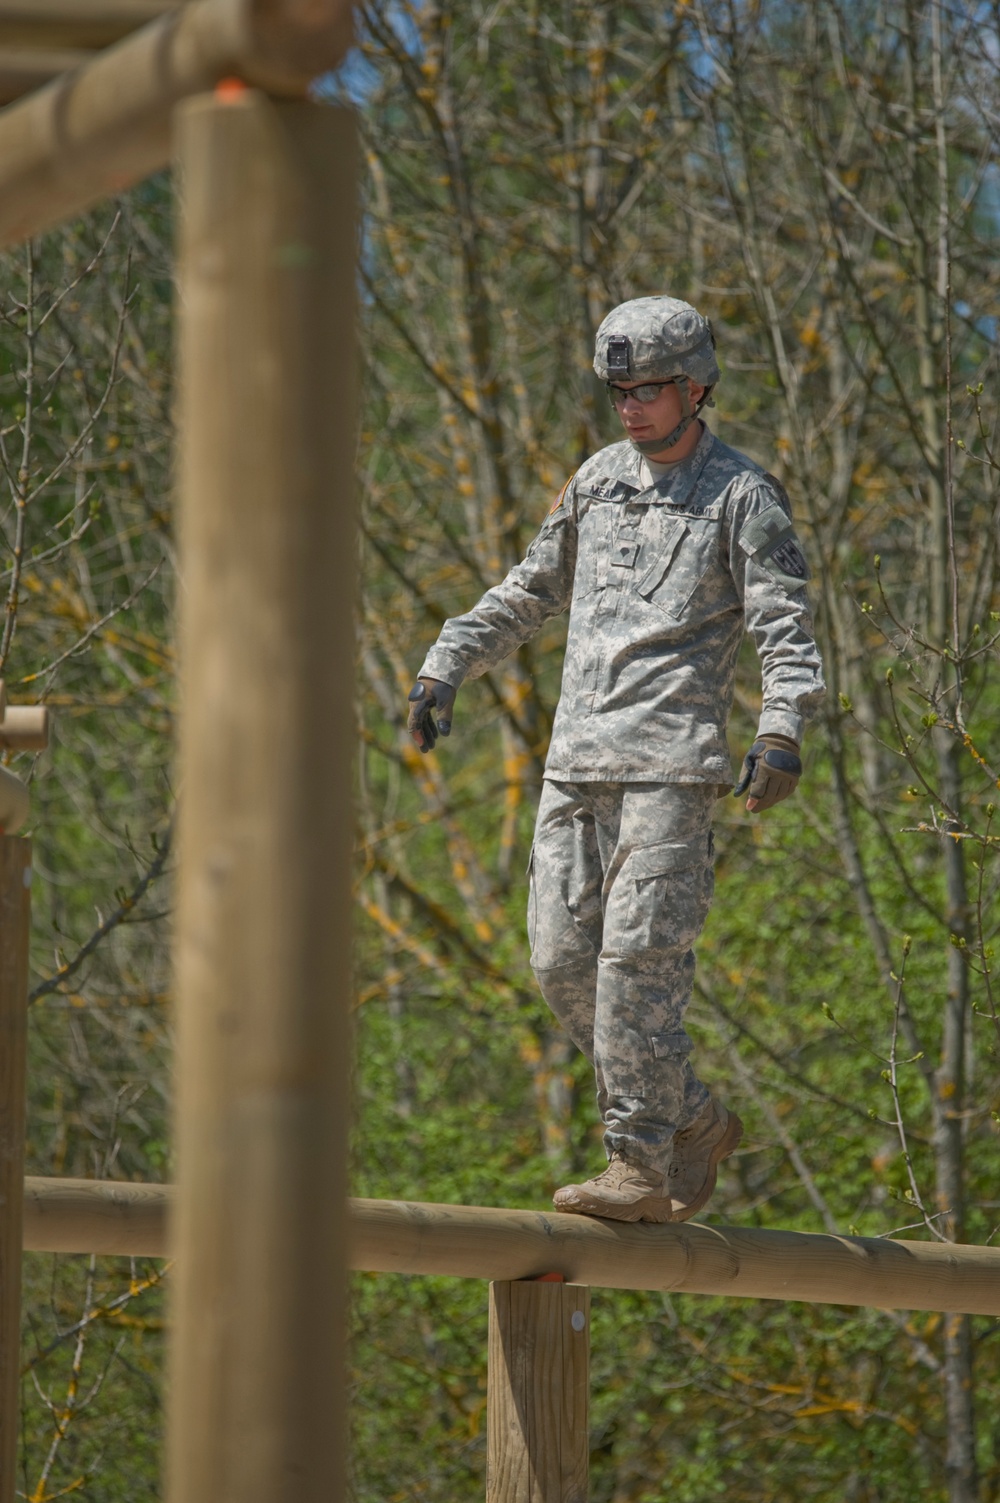 554th MPs training at Boeblingen Local Training Area